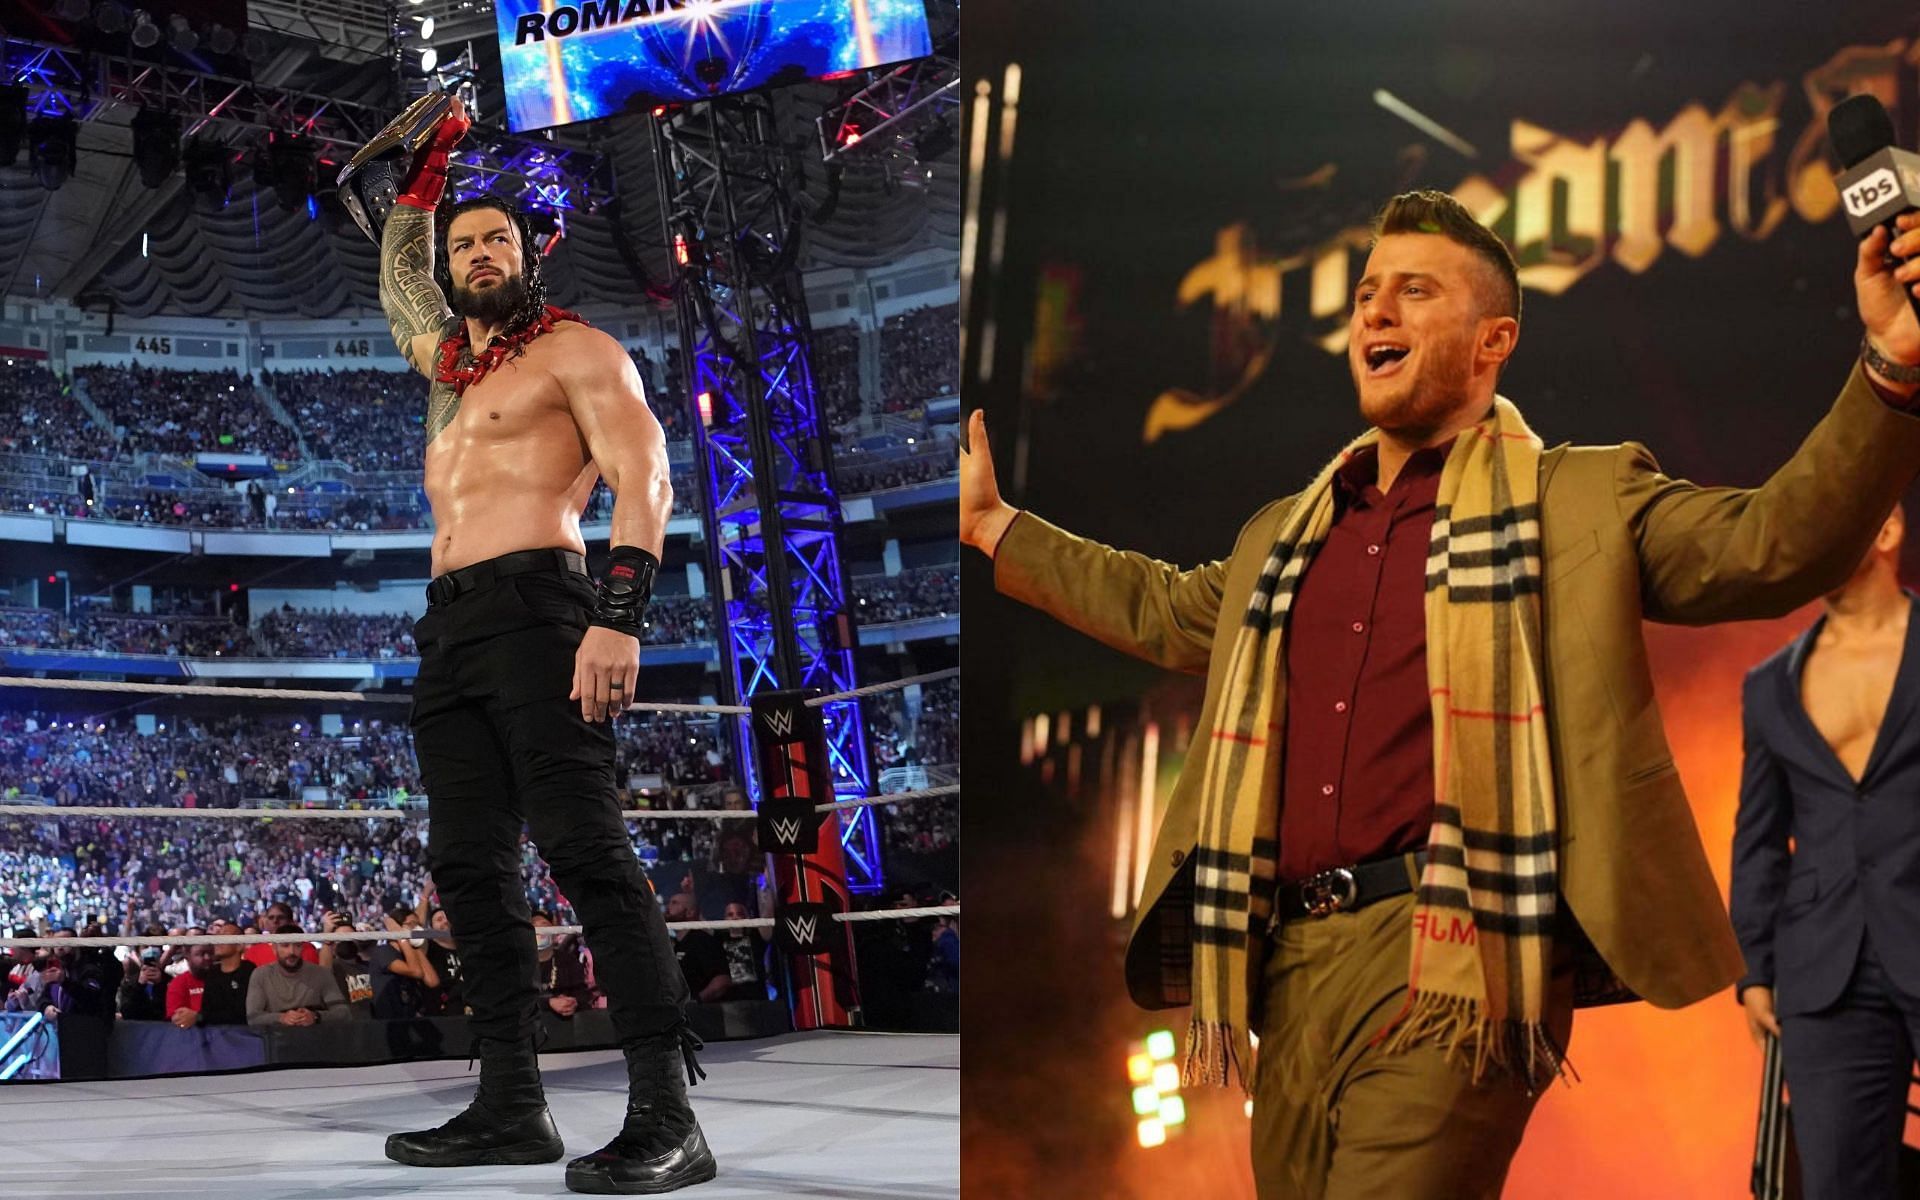 Could MJF part ways with AEW and jump into a feud with Roman Reigns?